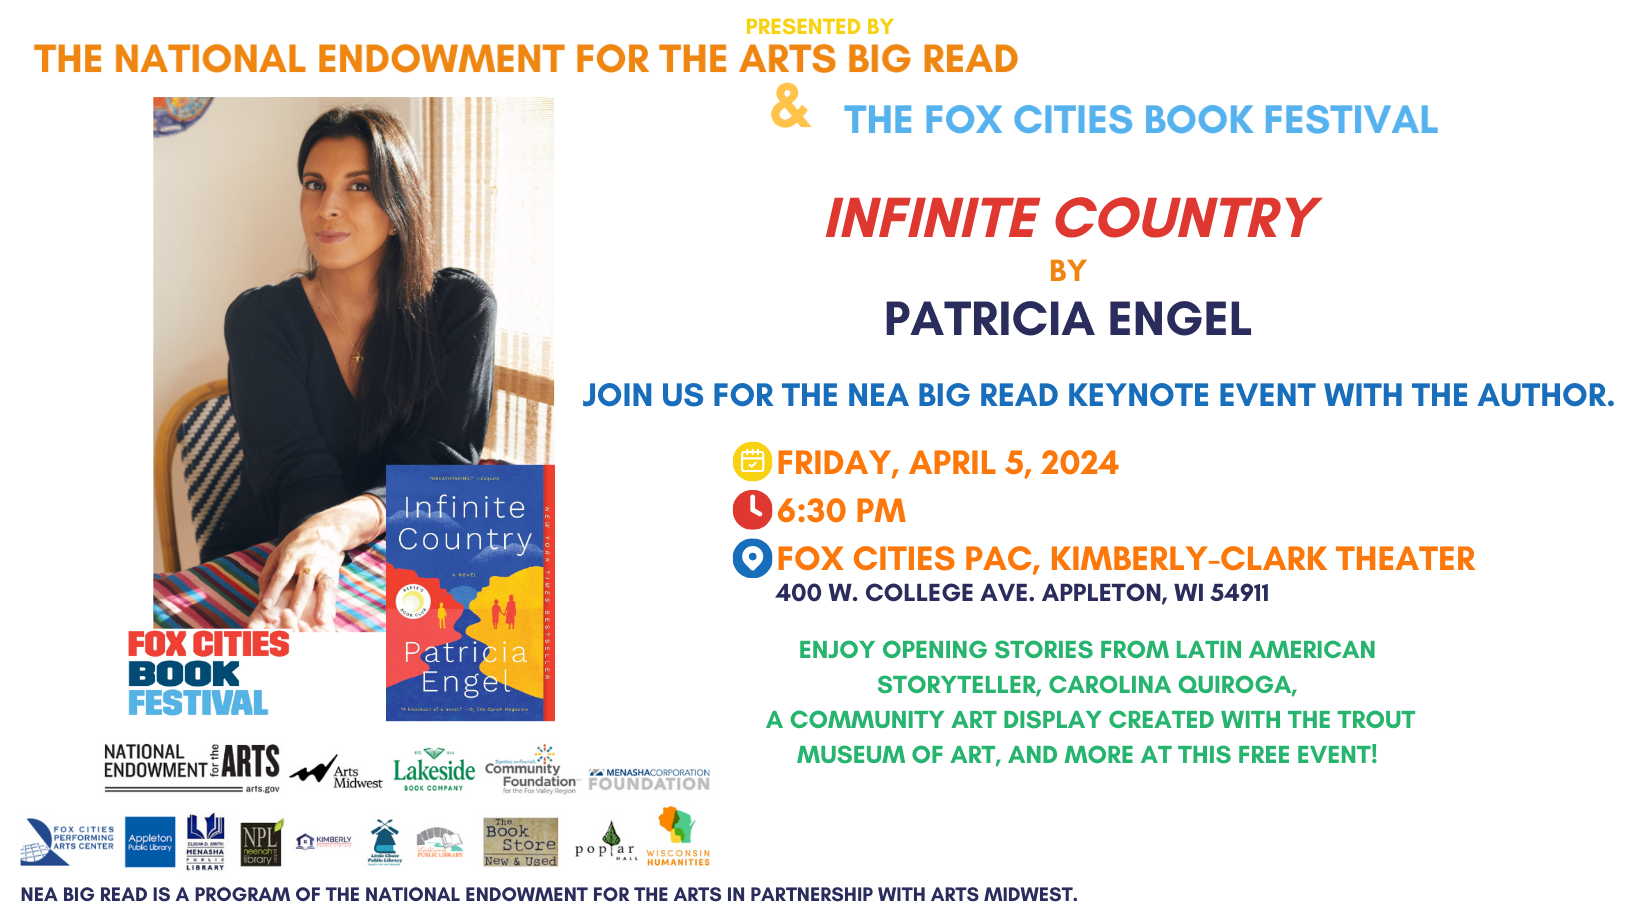 Fox Cities Reads author Patricia Engel event on Friday, April 5, 2024 at 6:30 pm Fox Cities PAC Kimberly-Clark Theater